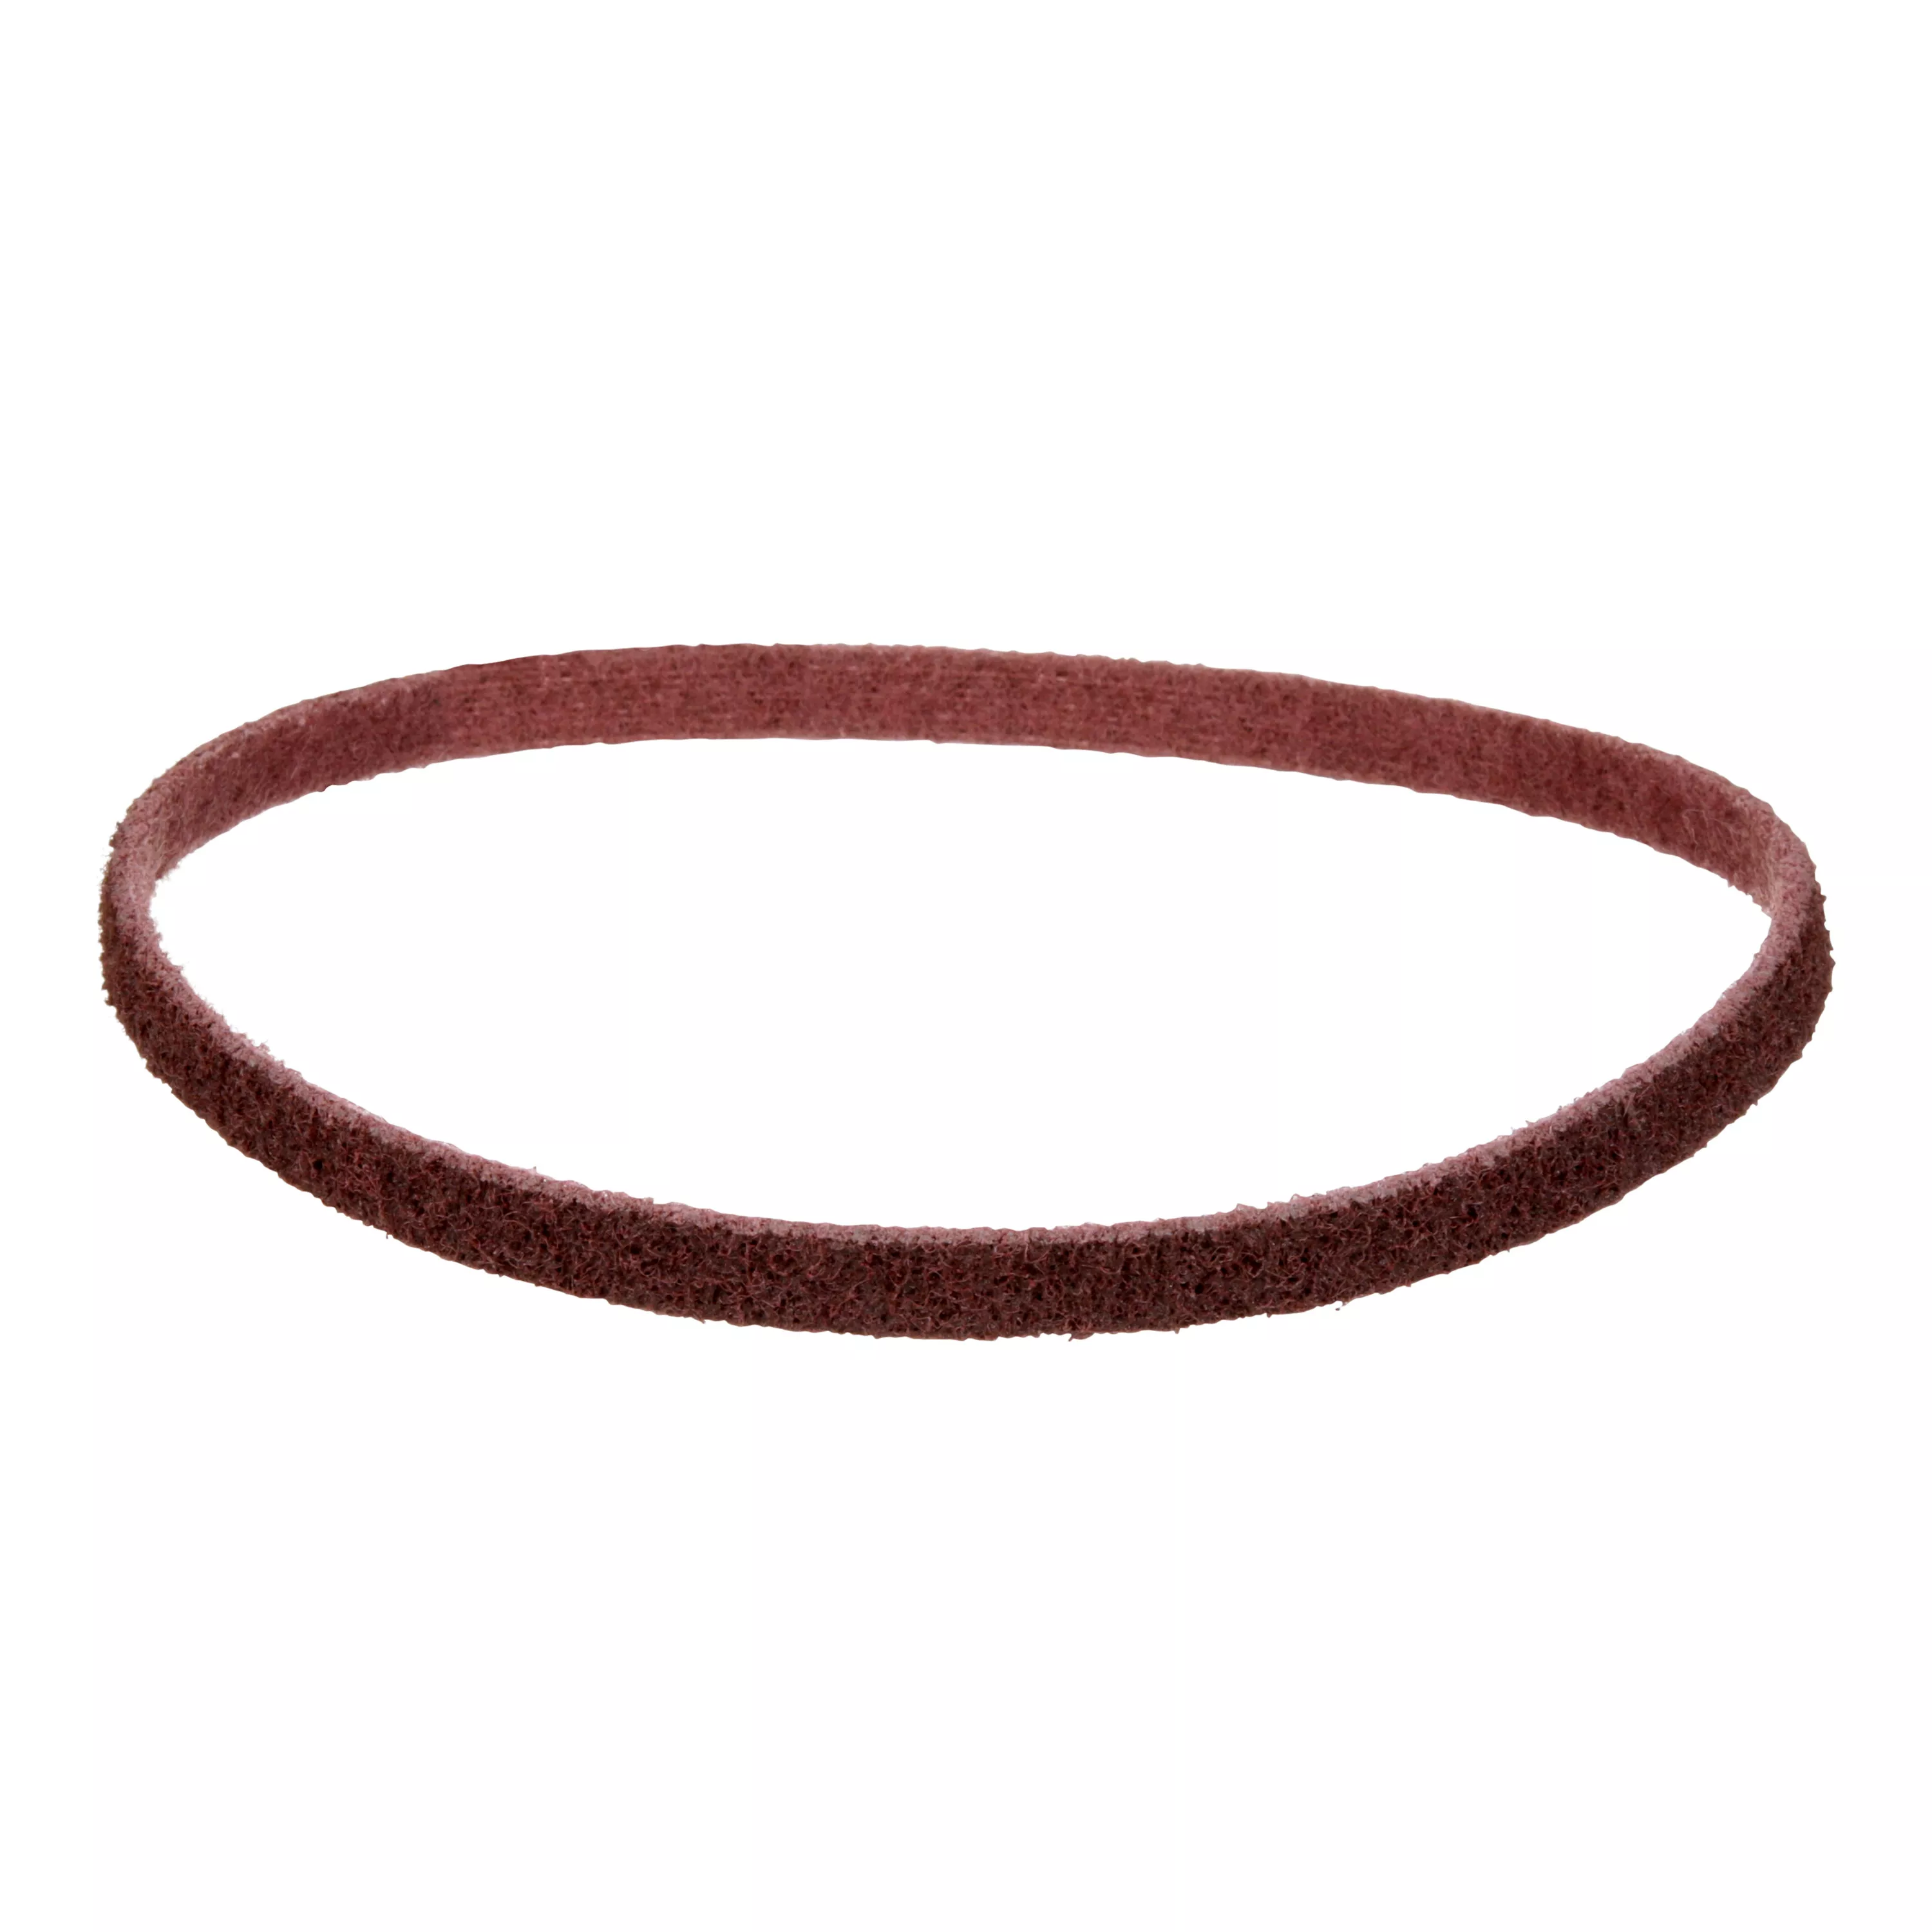 Standard Abrasives™ Surface Conditioning RC Belt 888052, 1/2 in x 24 in
MED, 10 ea/Case